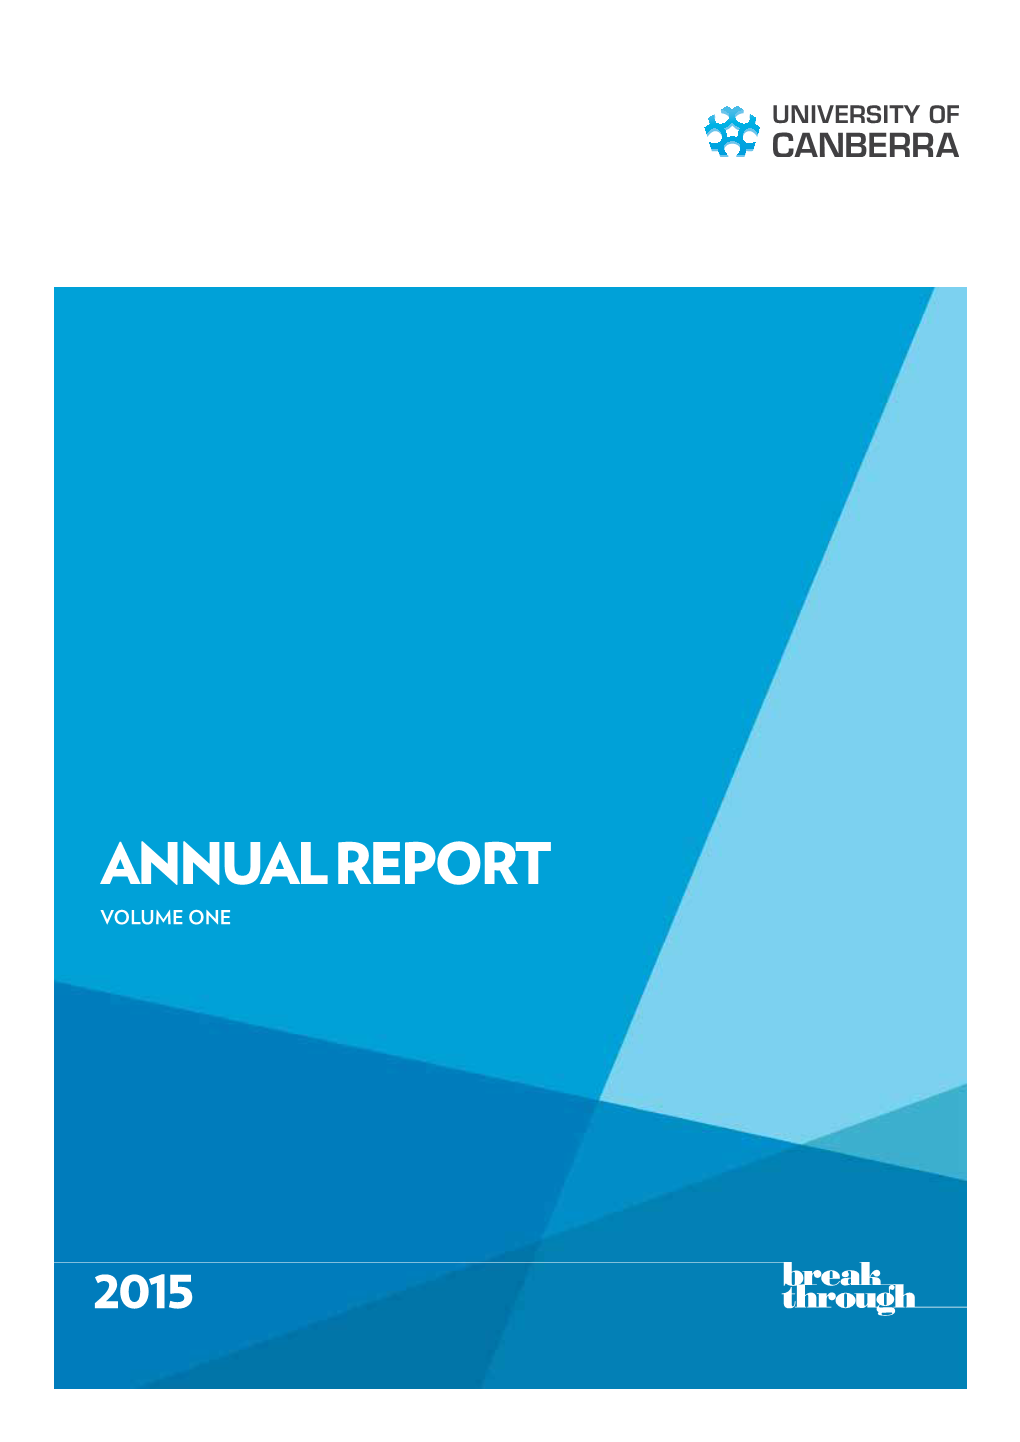 University of Canberra Annual Report 2015